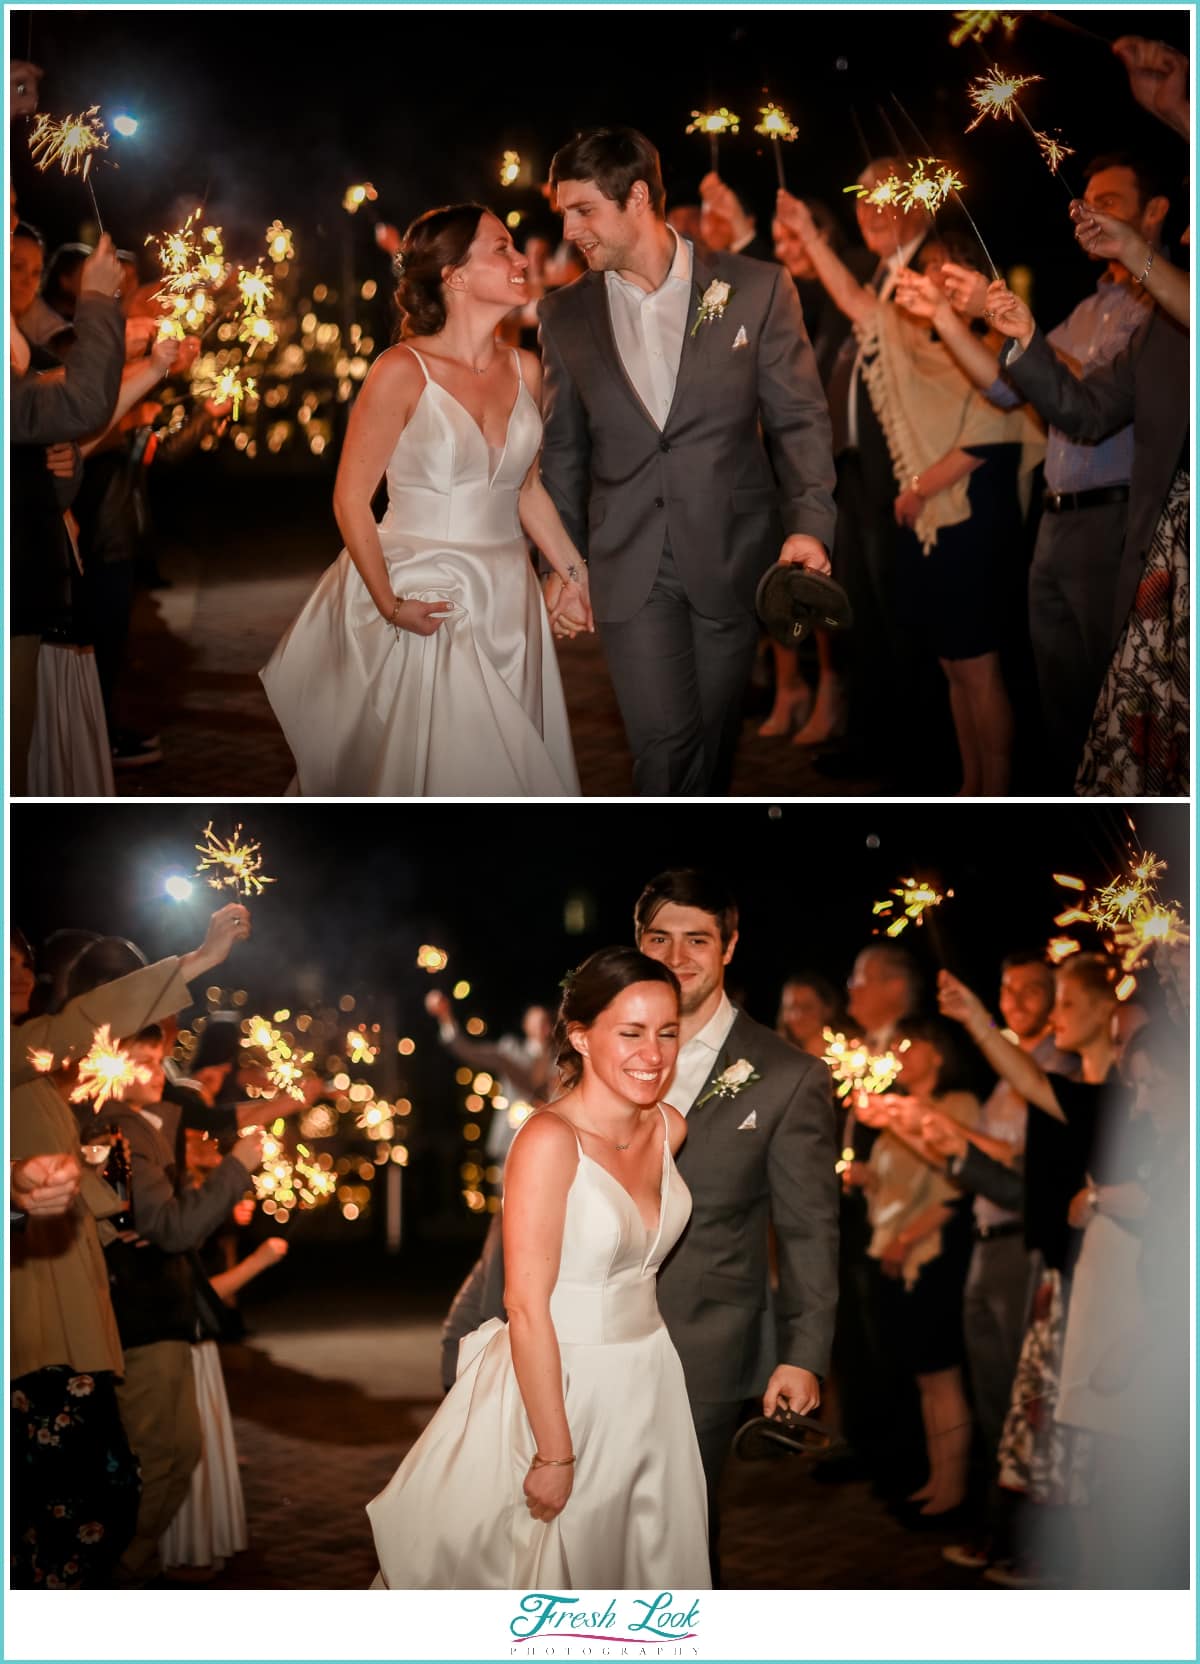 Sparkler exit at the reception